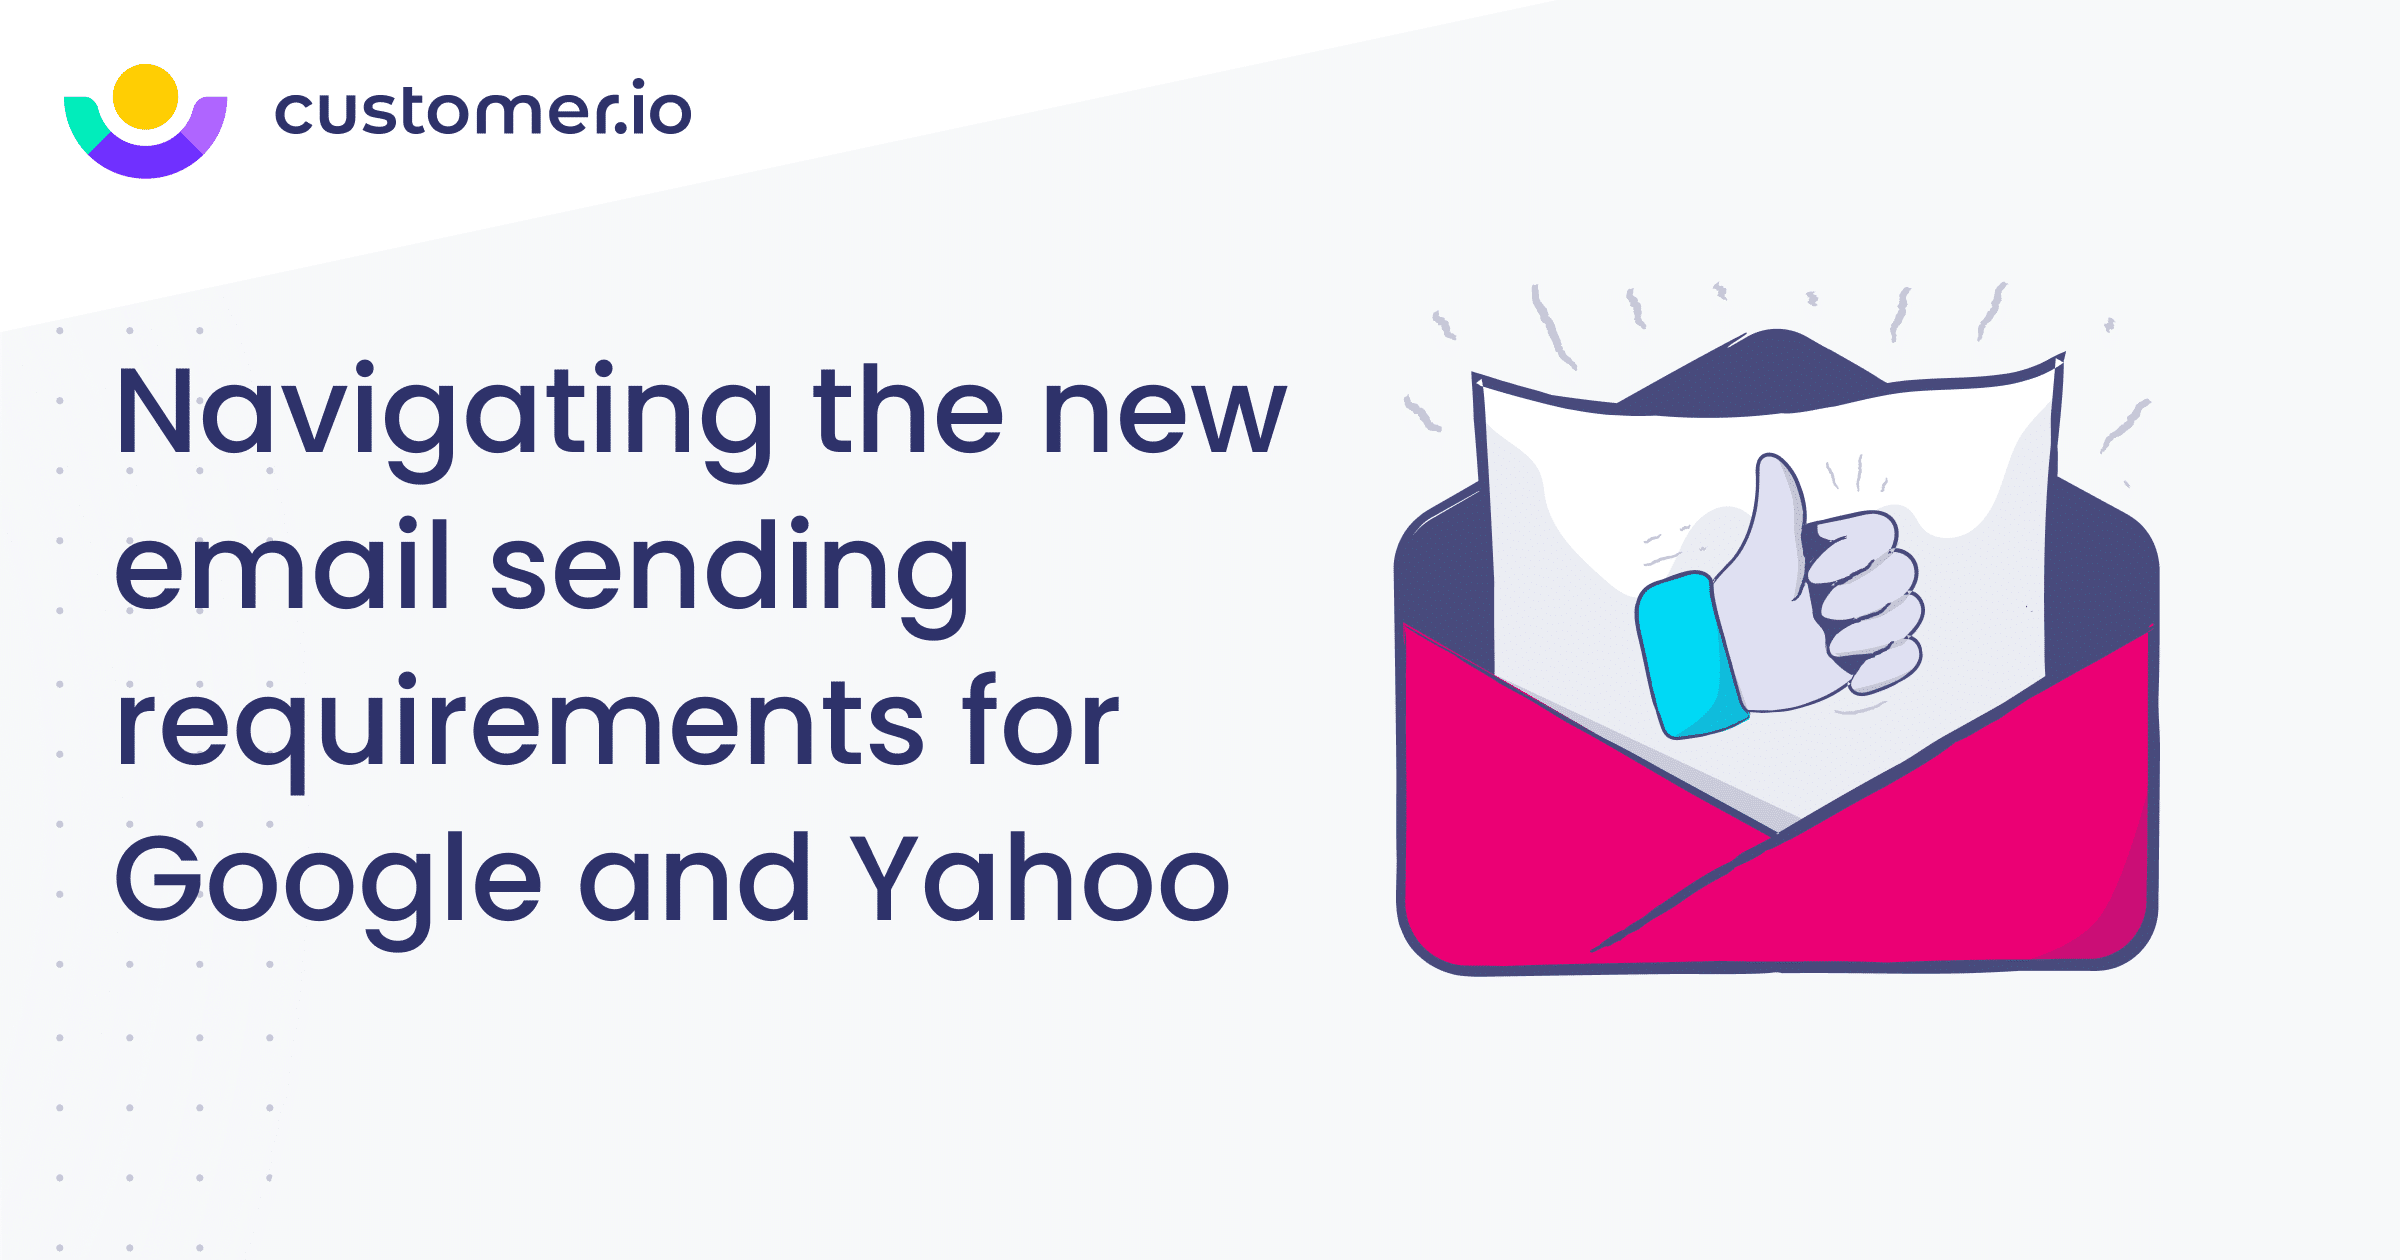 Navigating the new sending requirements for Gmail and Yahoo